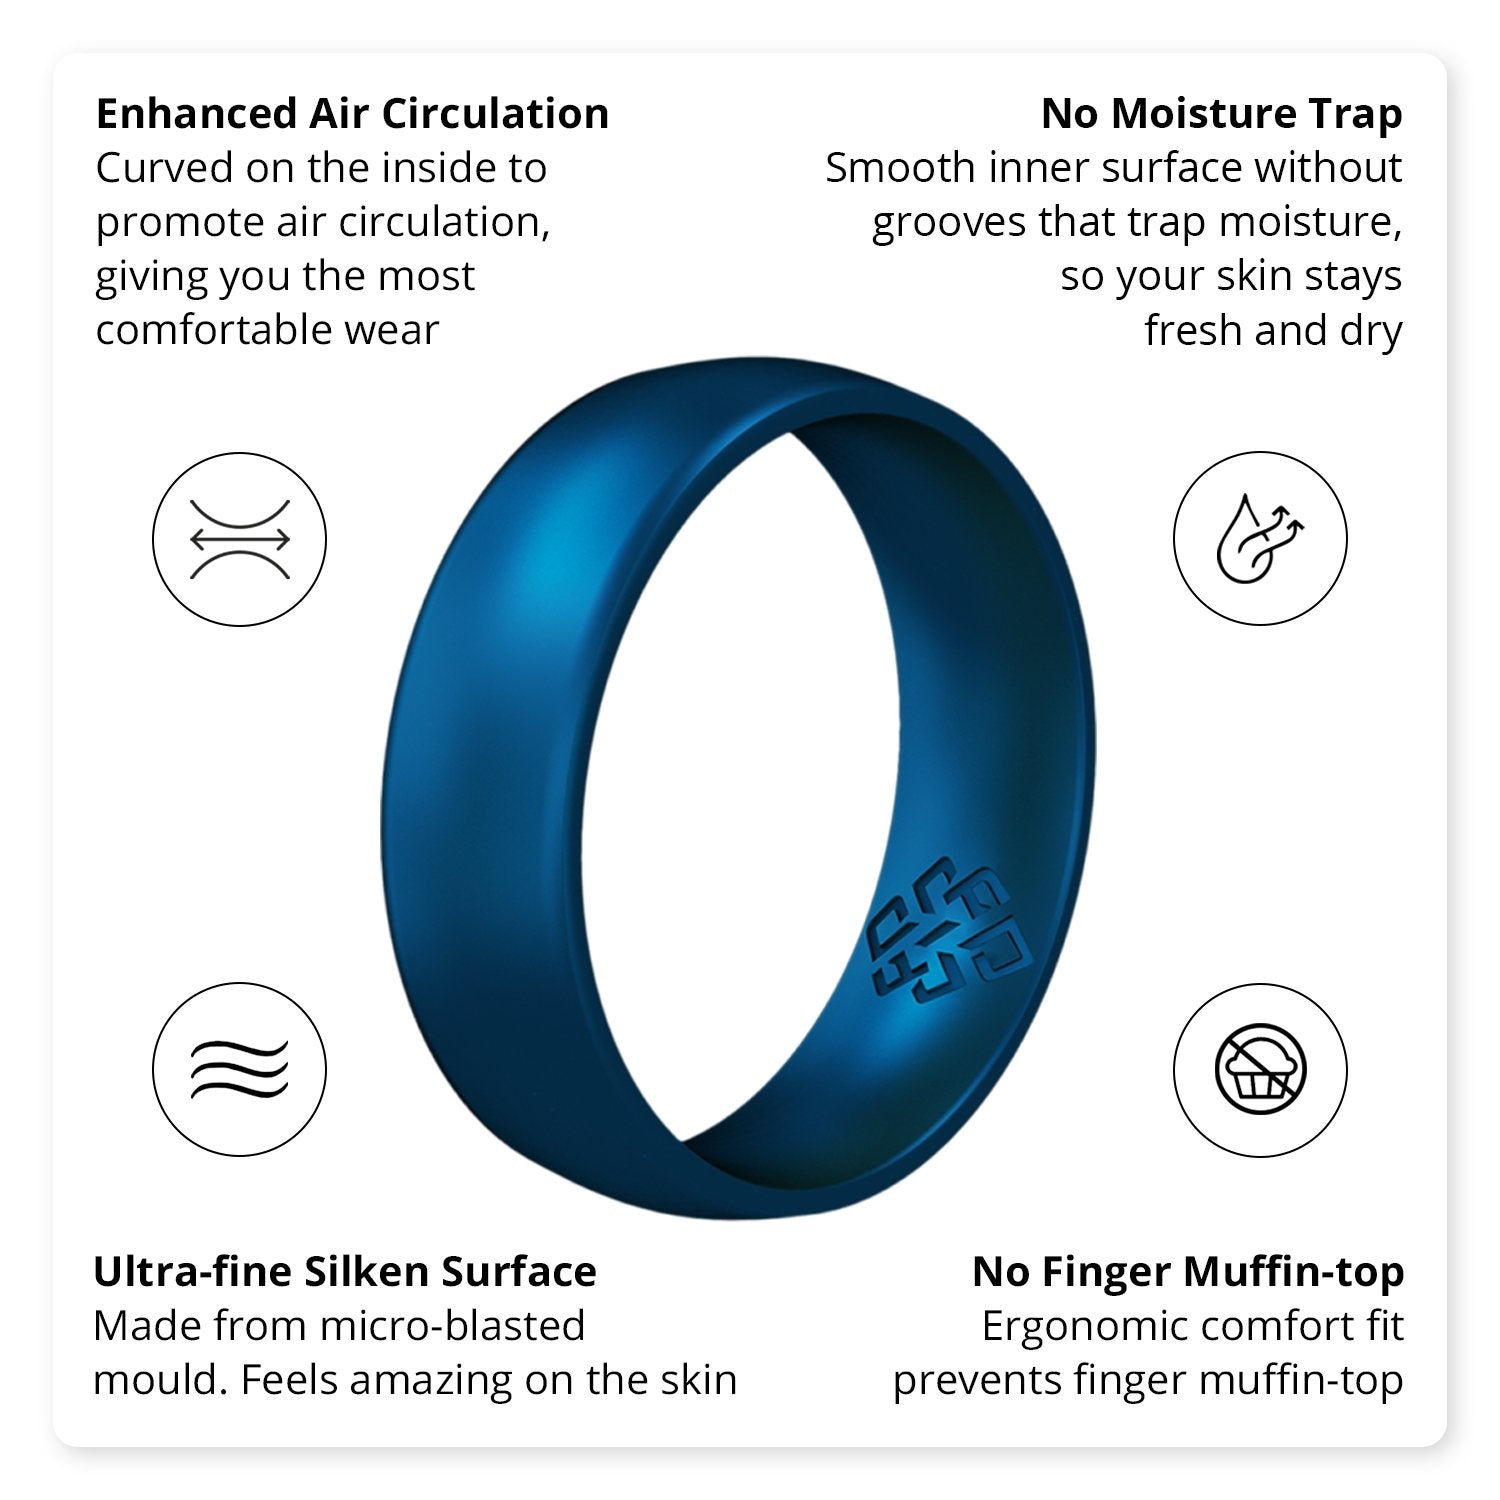 Metallic Blue Breathable Silicone Ring For Men and Women - Knot Theory